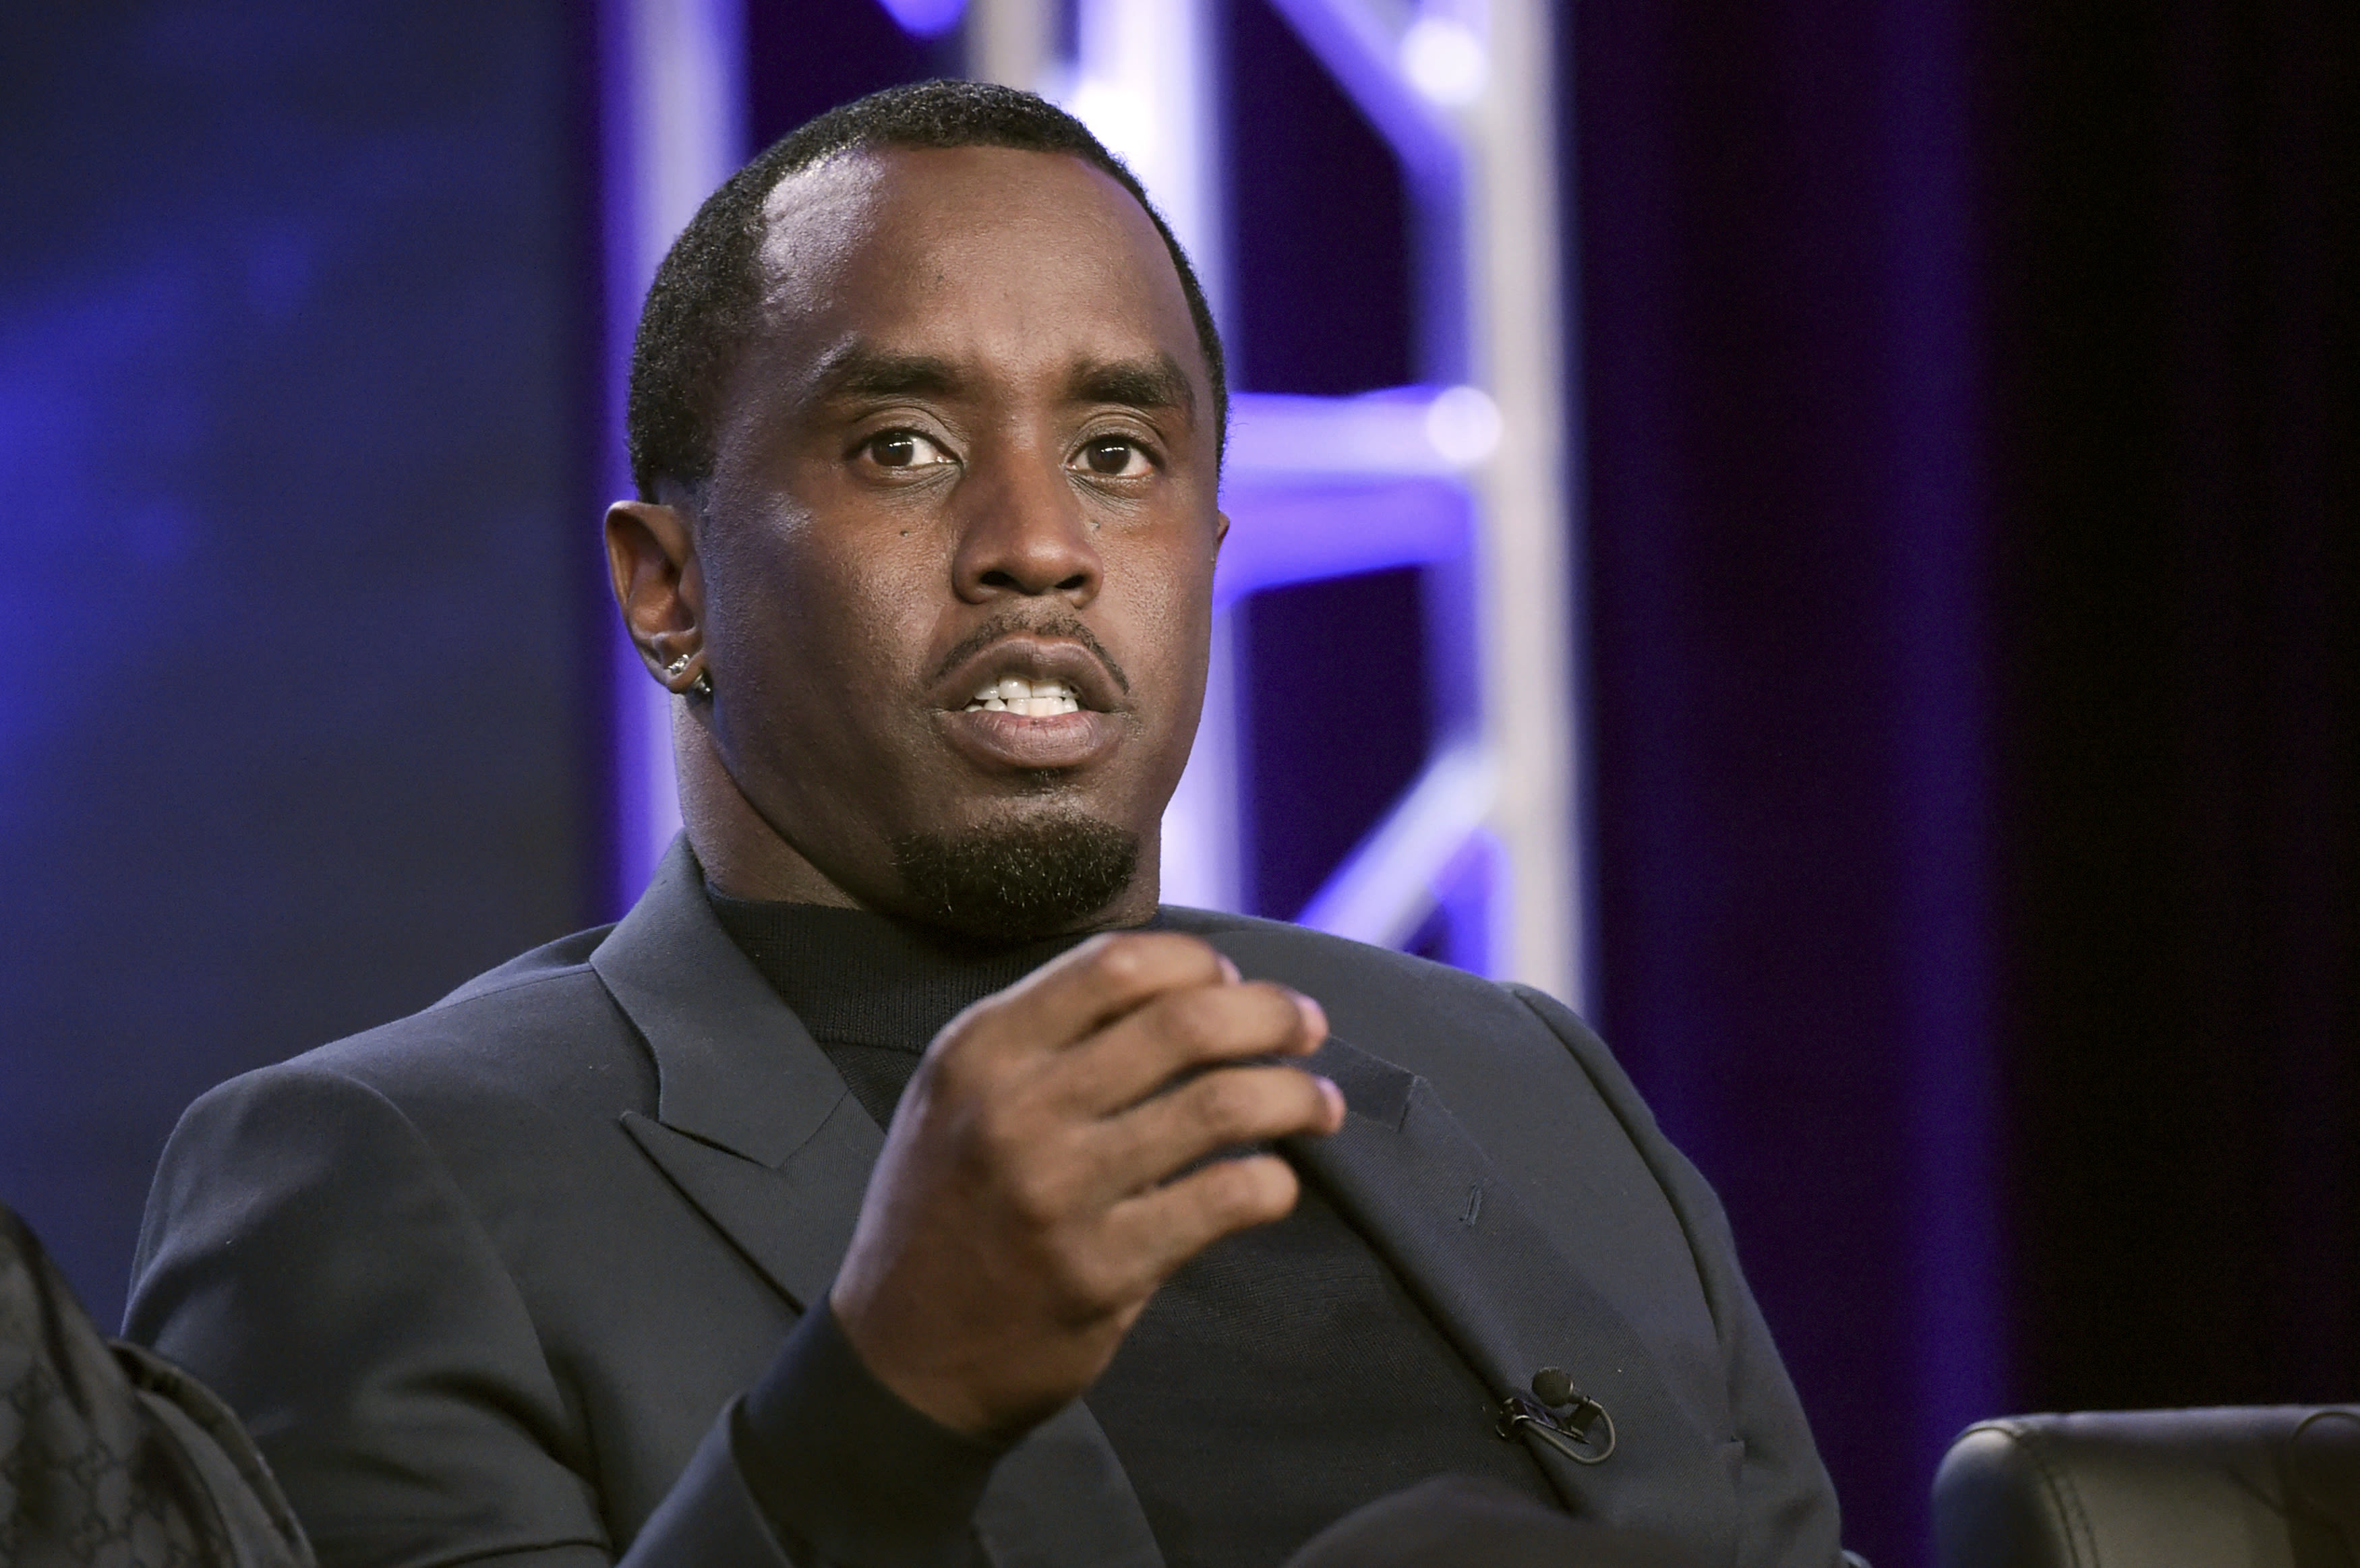 Witnesses in Sean 'Diddy' Combs' sex-trafficking probe prepare to testify before grand jury, source says